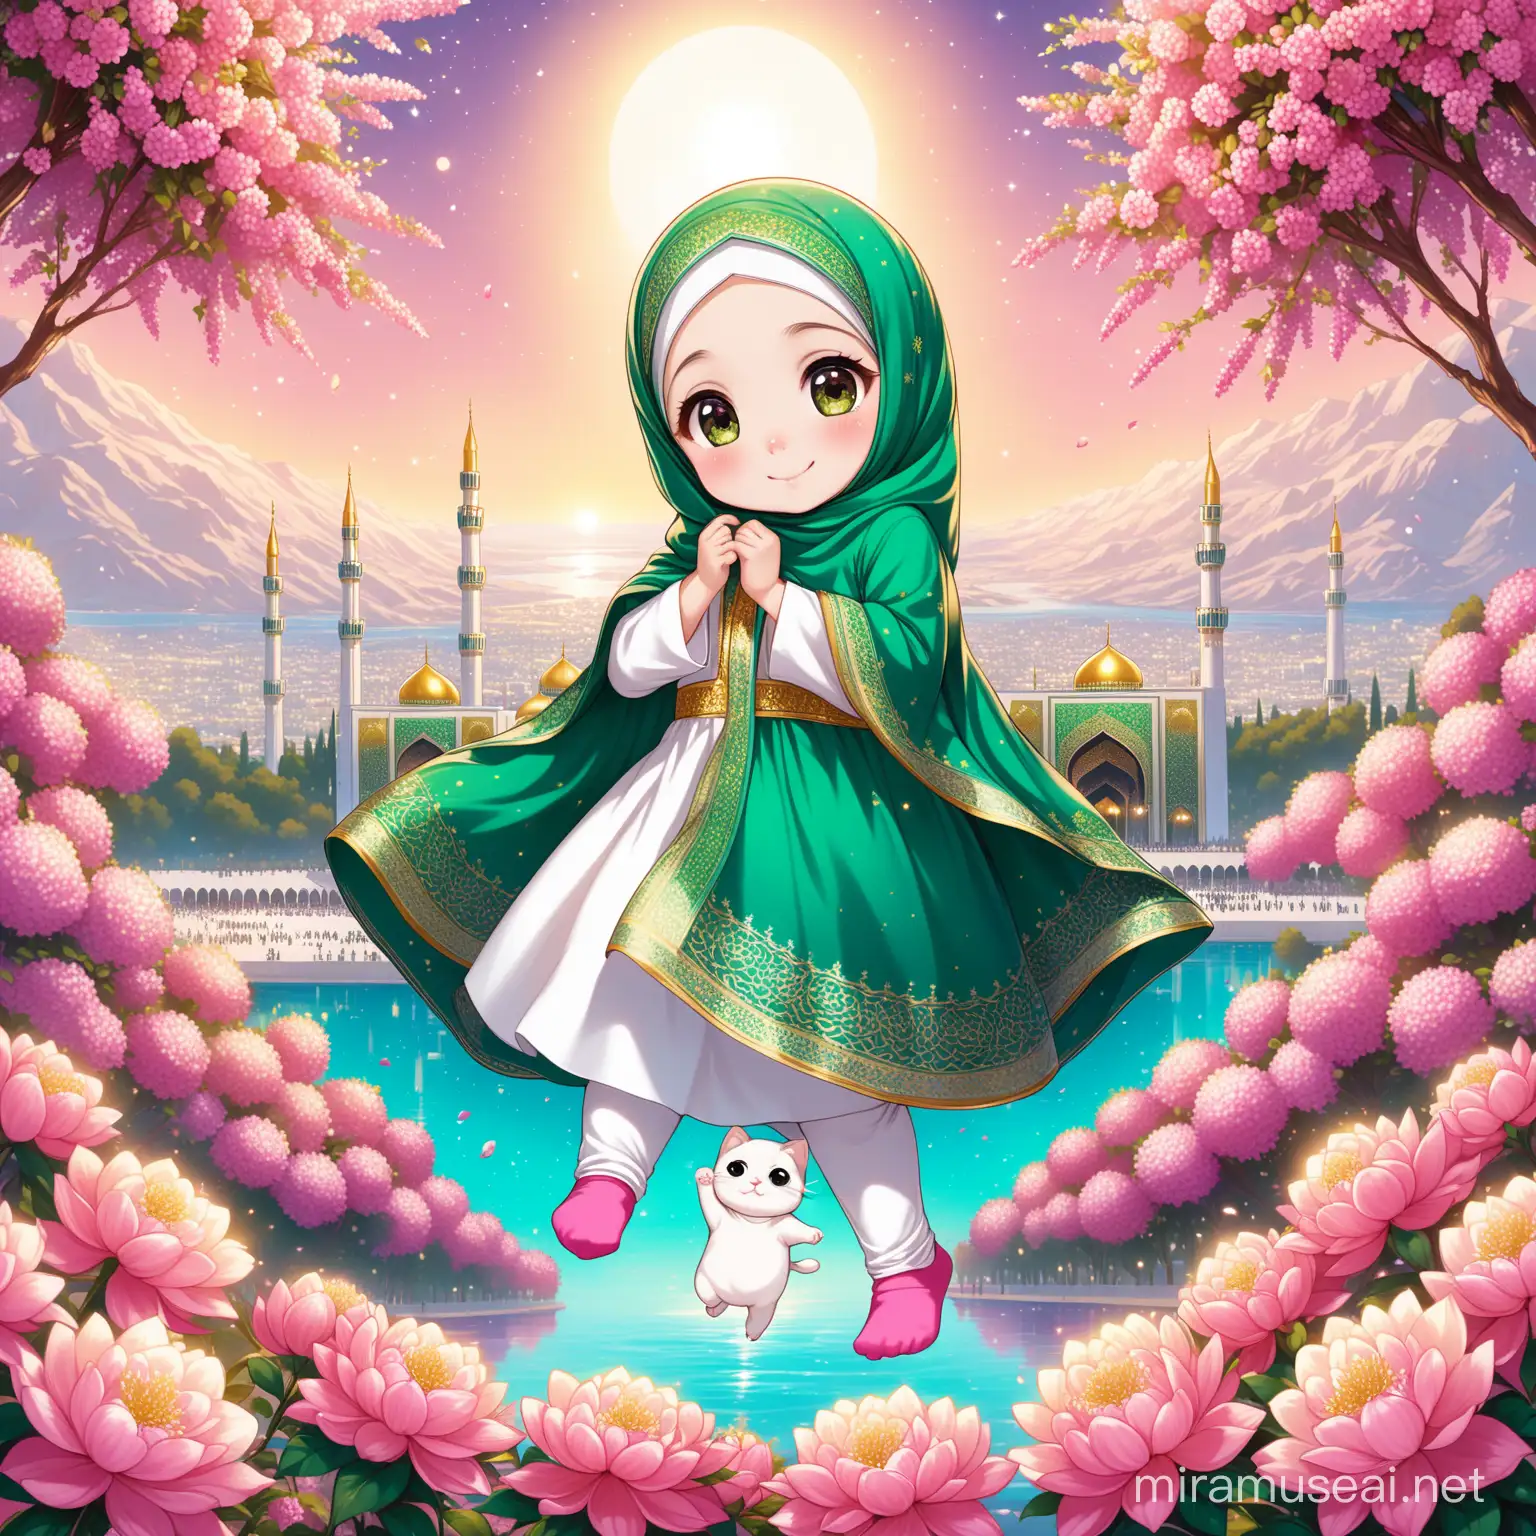 Character Persian little girl(full height, Muslim, with emphasis no hair out of veil(Hijab), small eyes, bigger nose, white skin, cute, smiling, wearing socks, clothes full of Persian designs).

Atmosphere shrine of Imam Reza, nice flag of Iran proudly raised, firing satellite to sky and full of many pink flowers, lake, sparing.